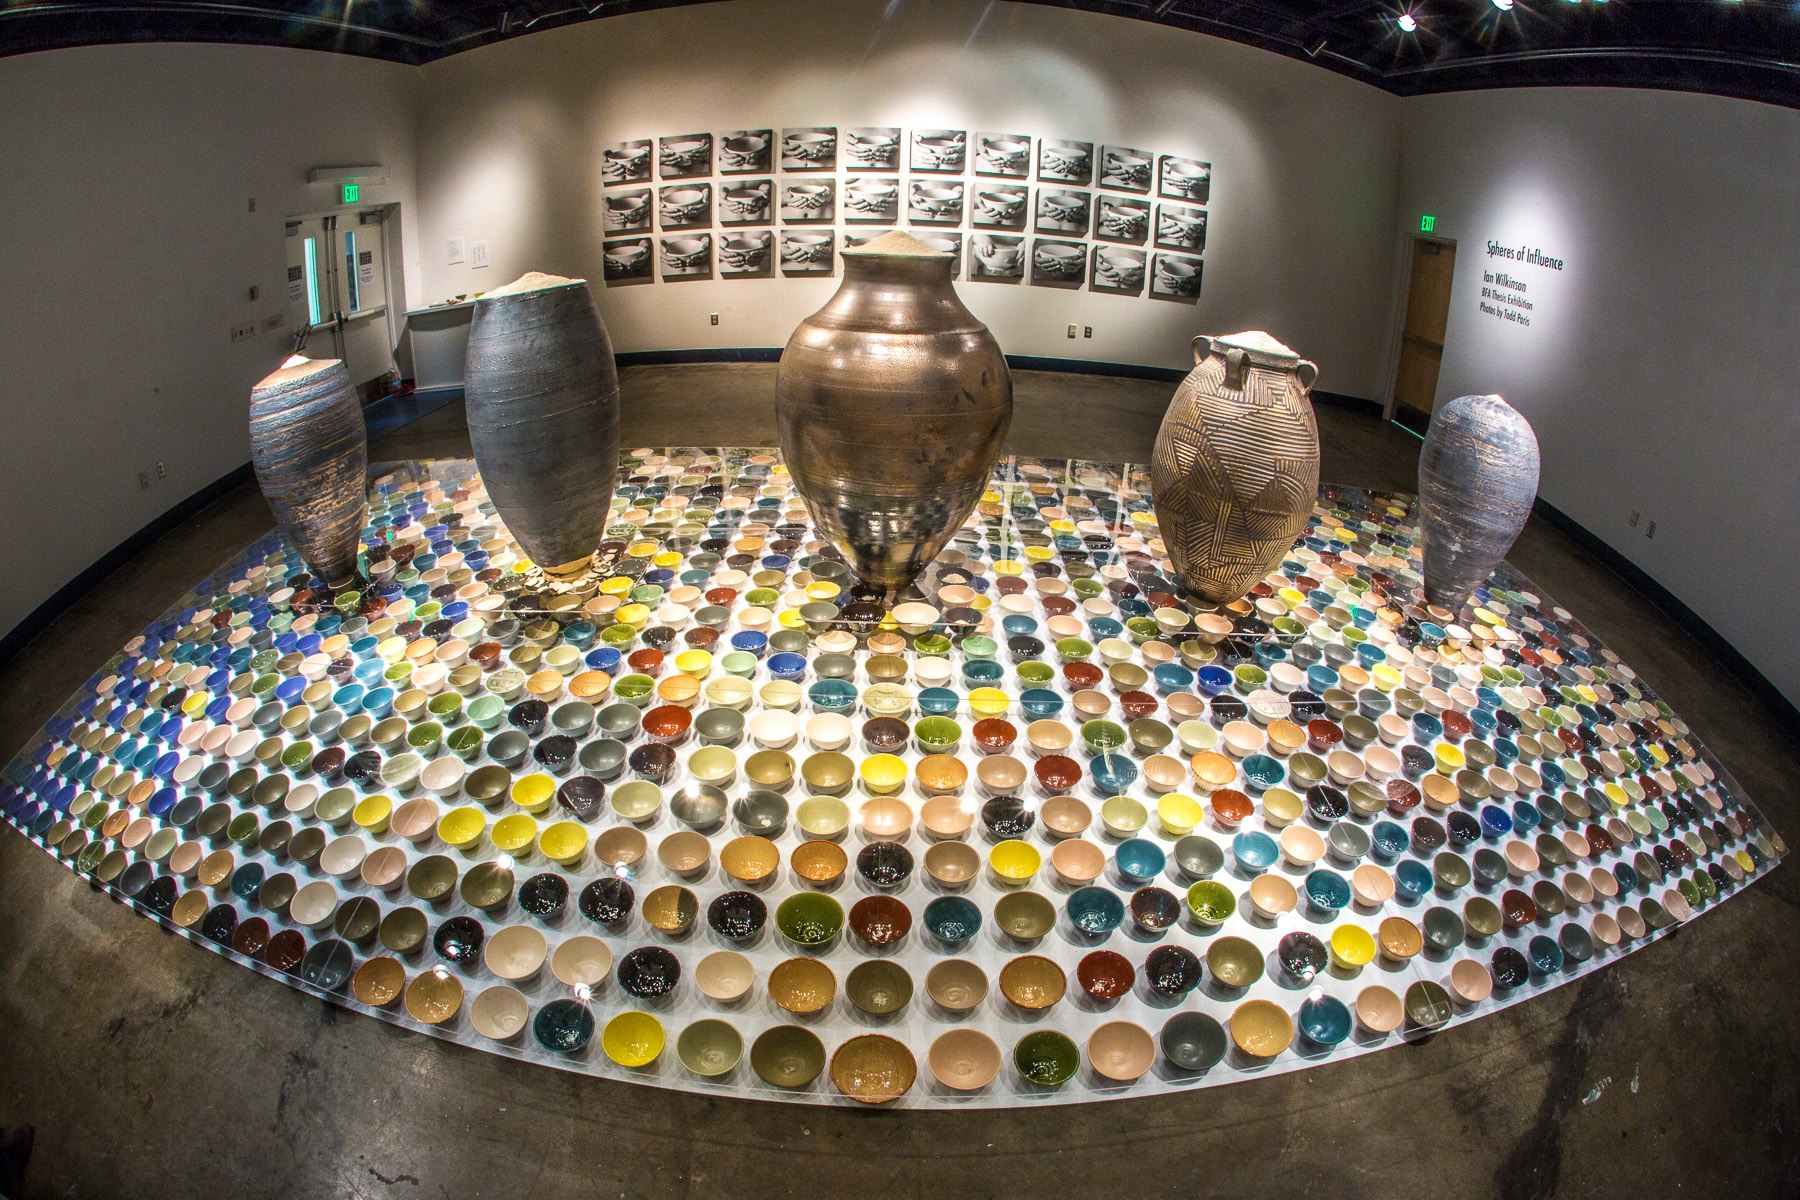 spheres of influence exhibit featuring clay bowls filling an entire room